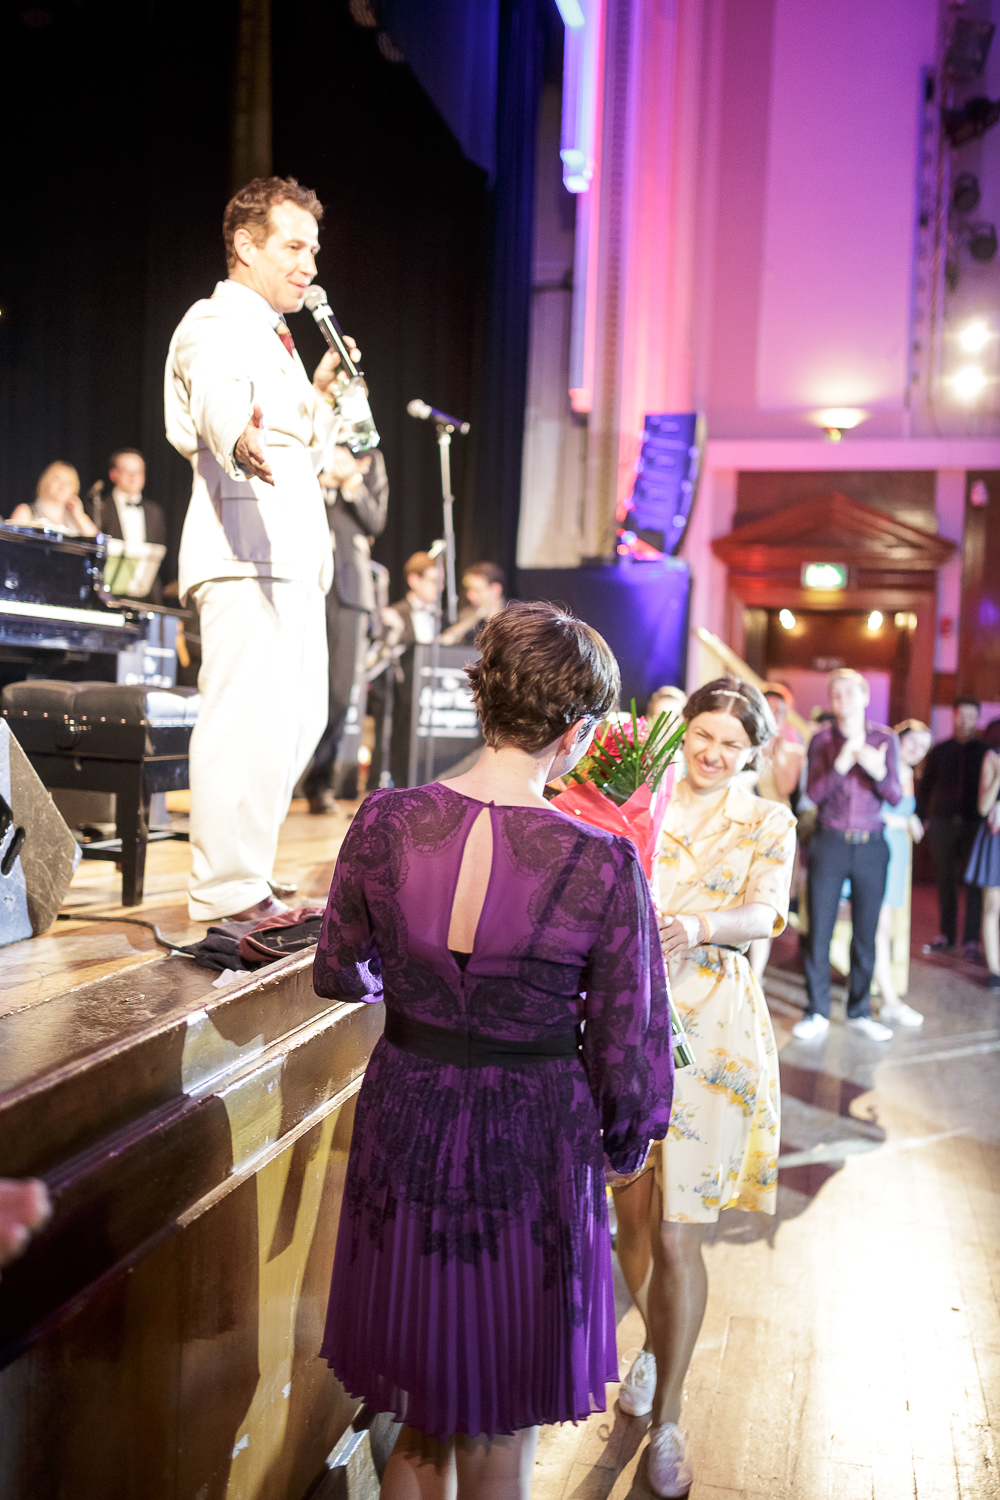  The London Swing Festival 2015 - Sunday Night. Photo Credit: For Dancers Only (http://d.pr/1fEEY) - http://www.ebobrie.com/london-swing-festival-2015/ 